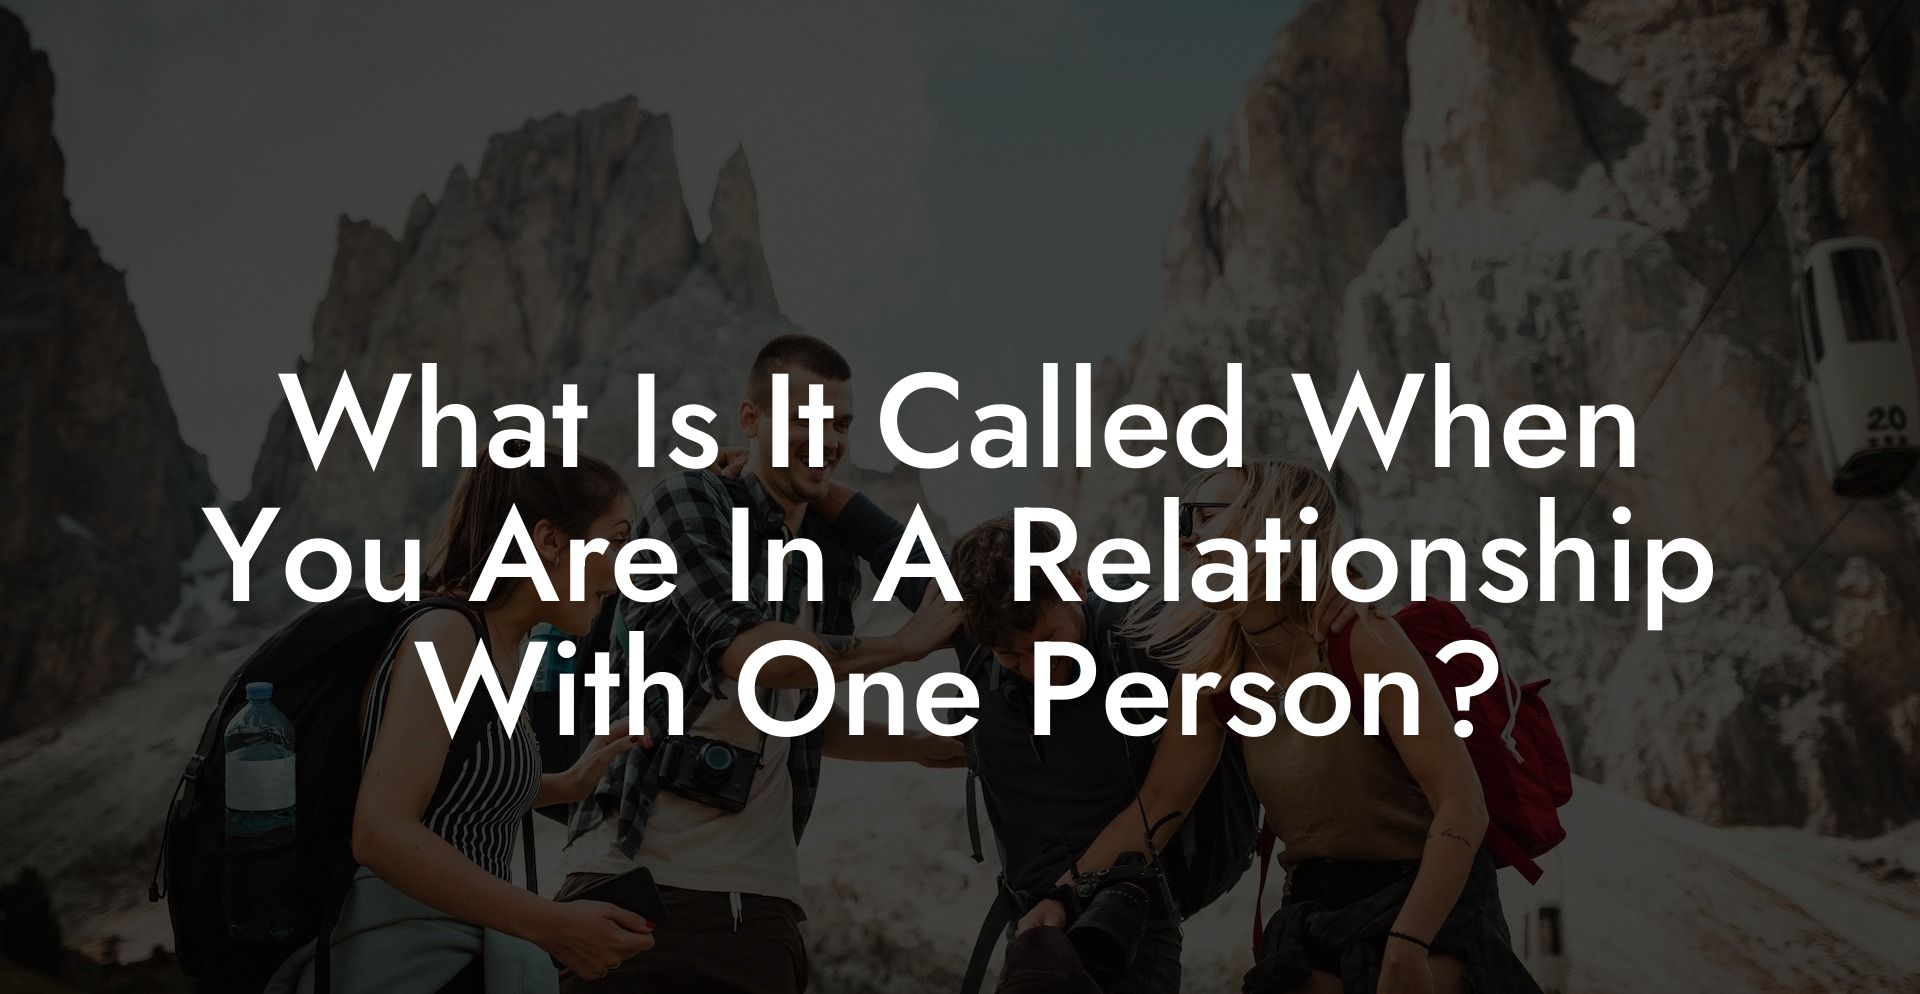 What Is It Called When You Are In A Relationship With One Person?